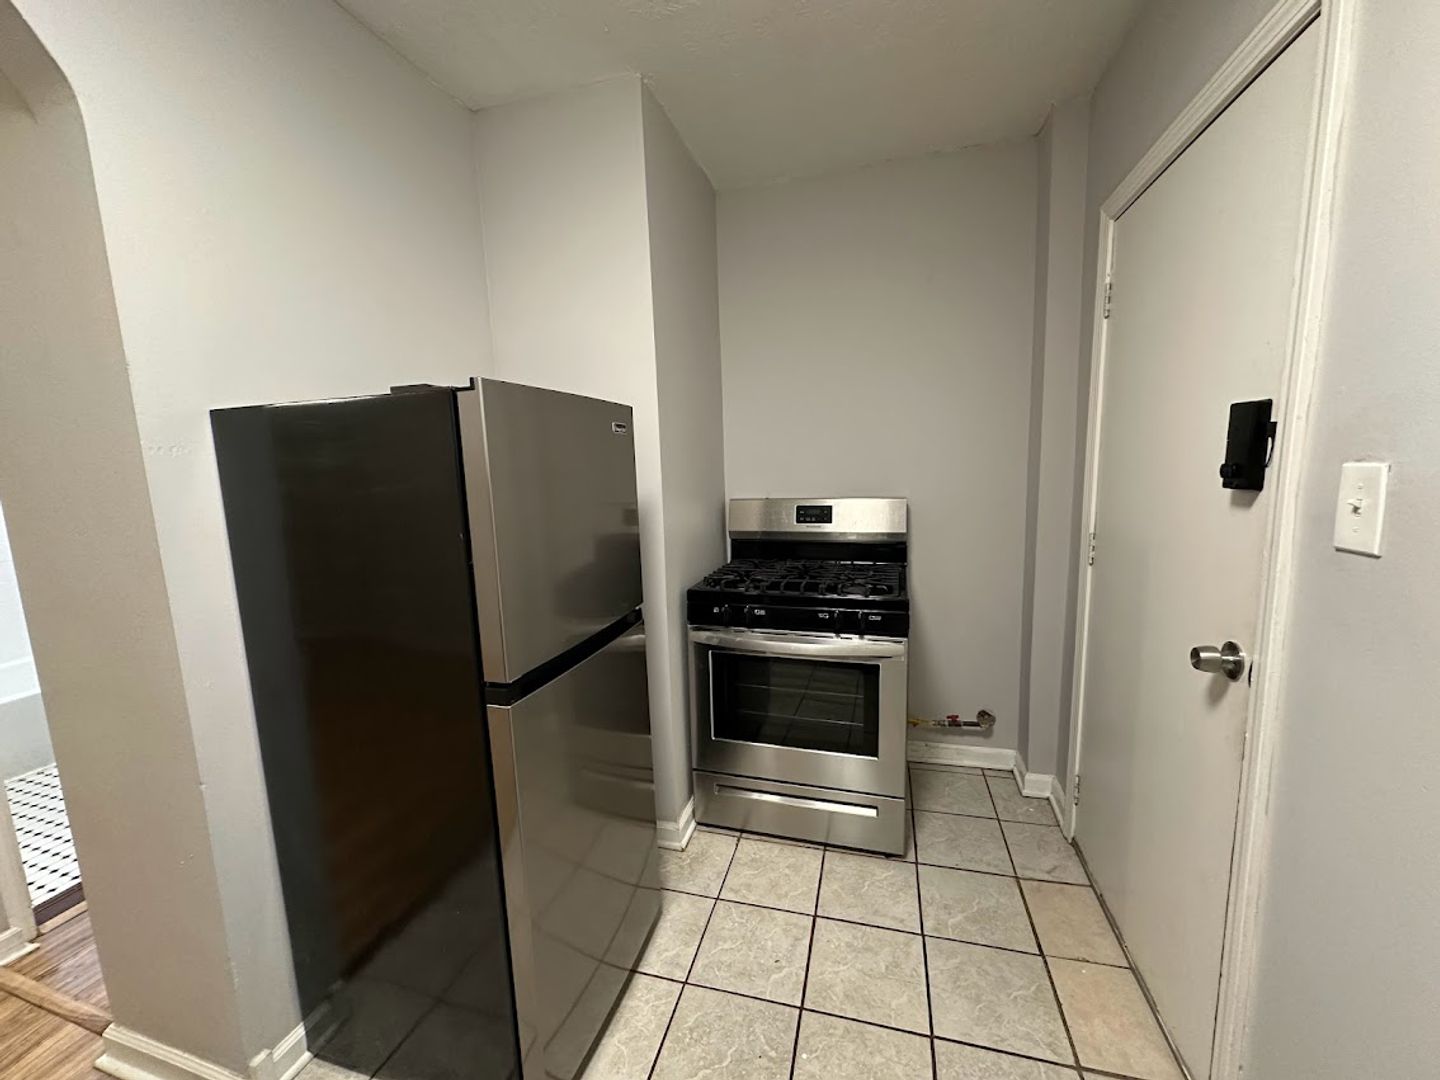 1 Bed & 1 Bath Apartment Unit for Rent | Cleveland Heights | Ohio #44118 Image